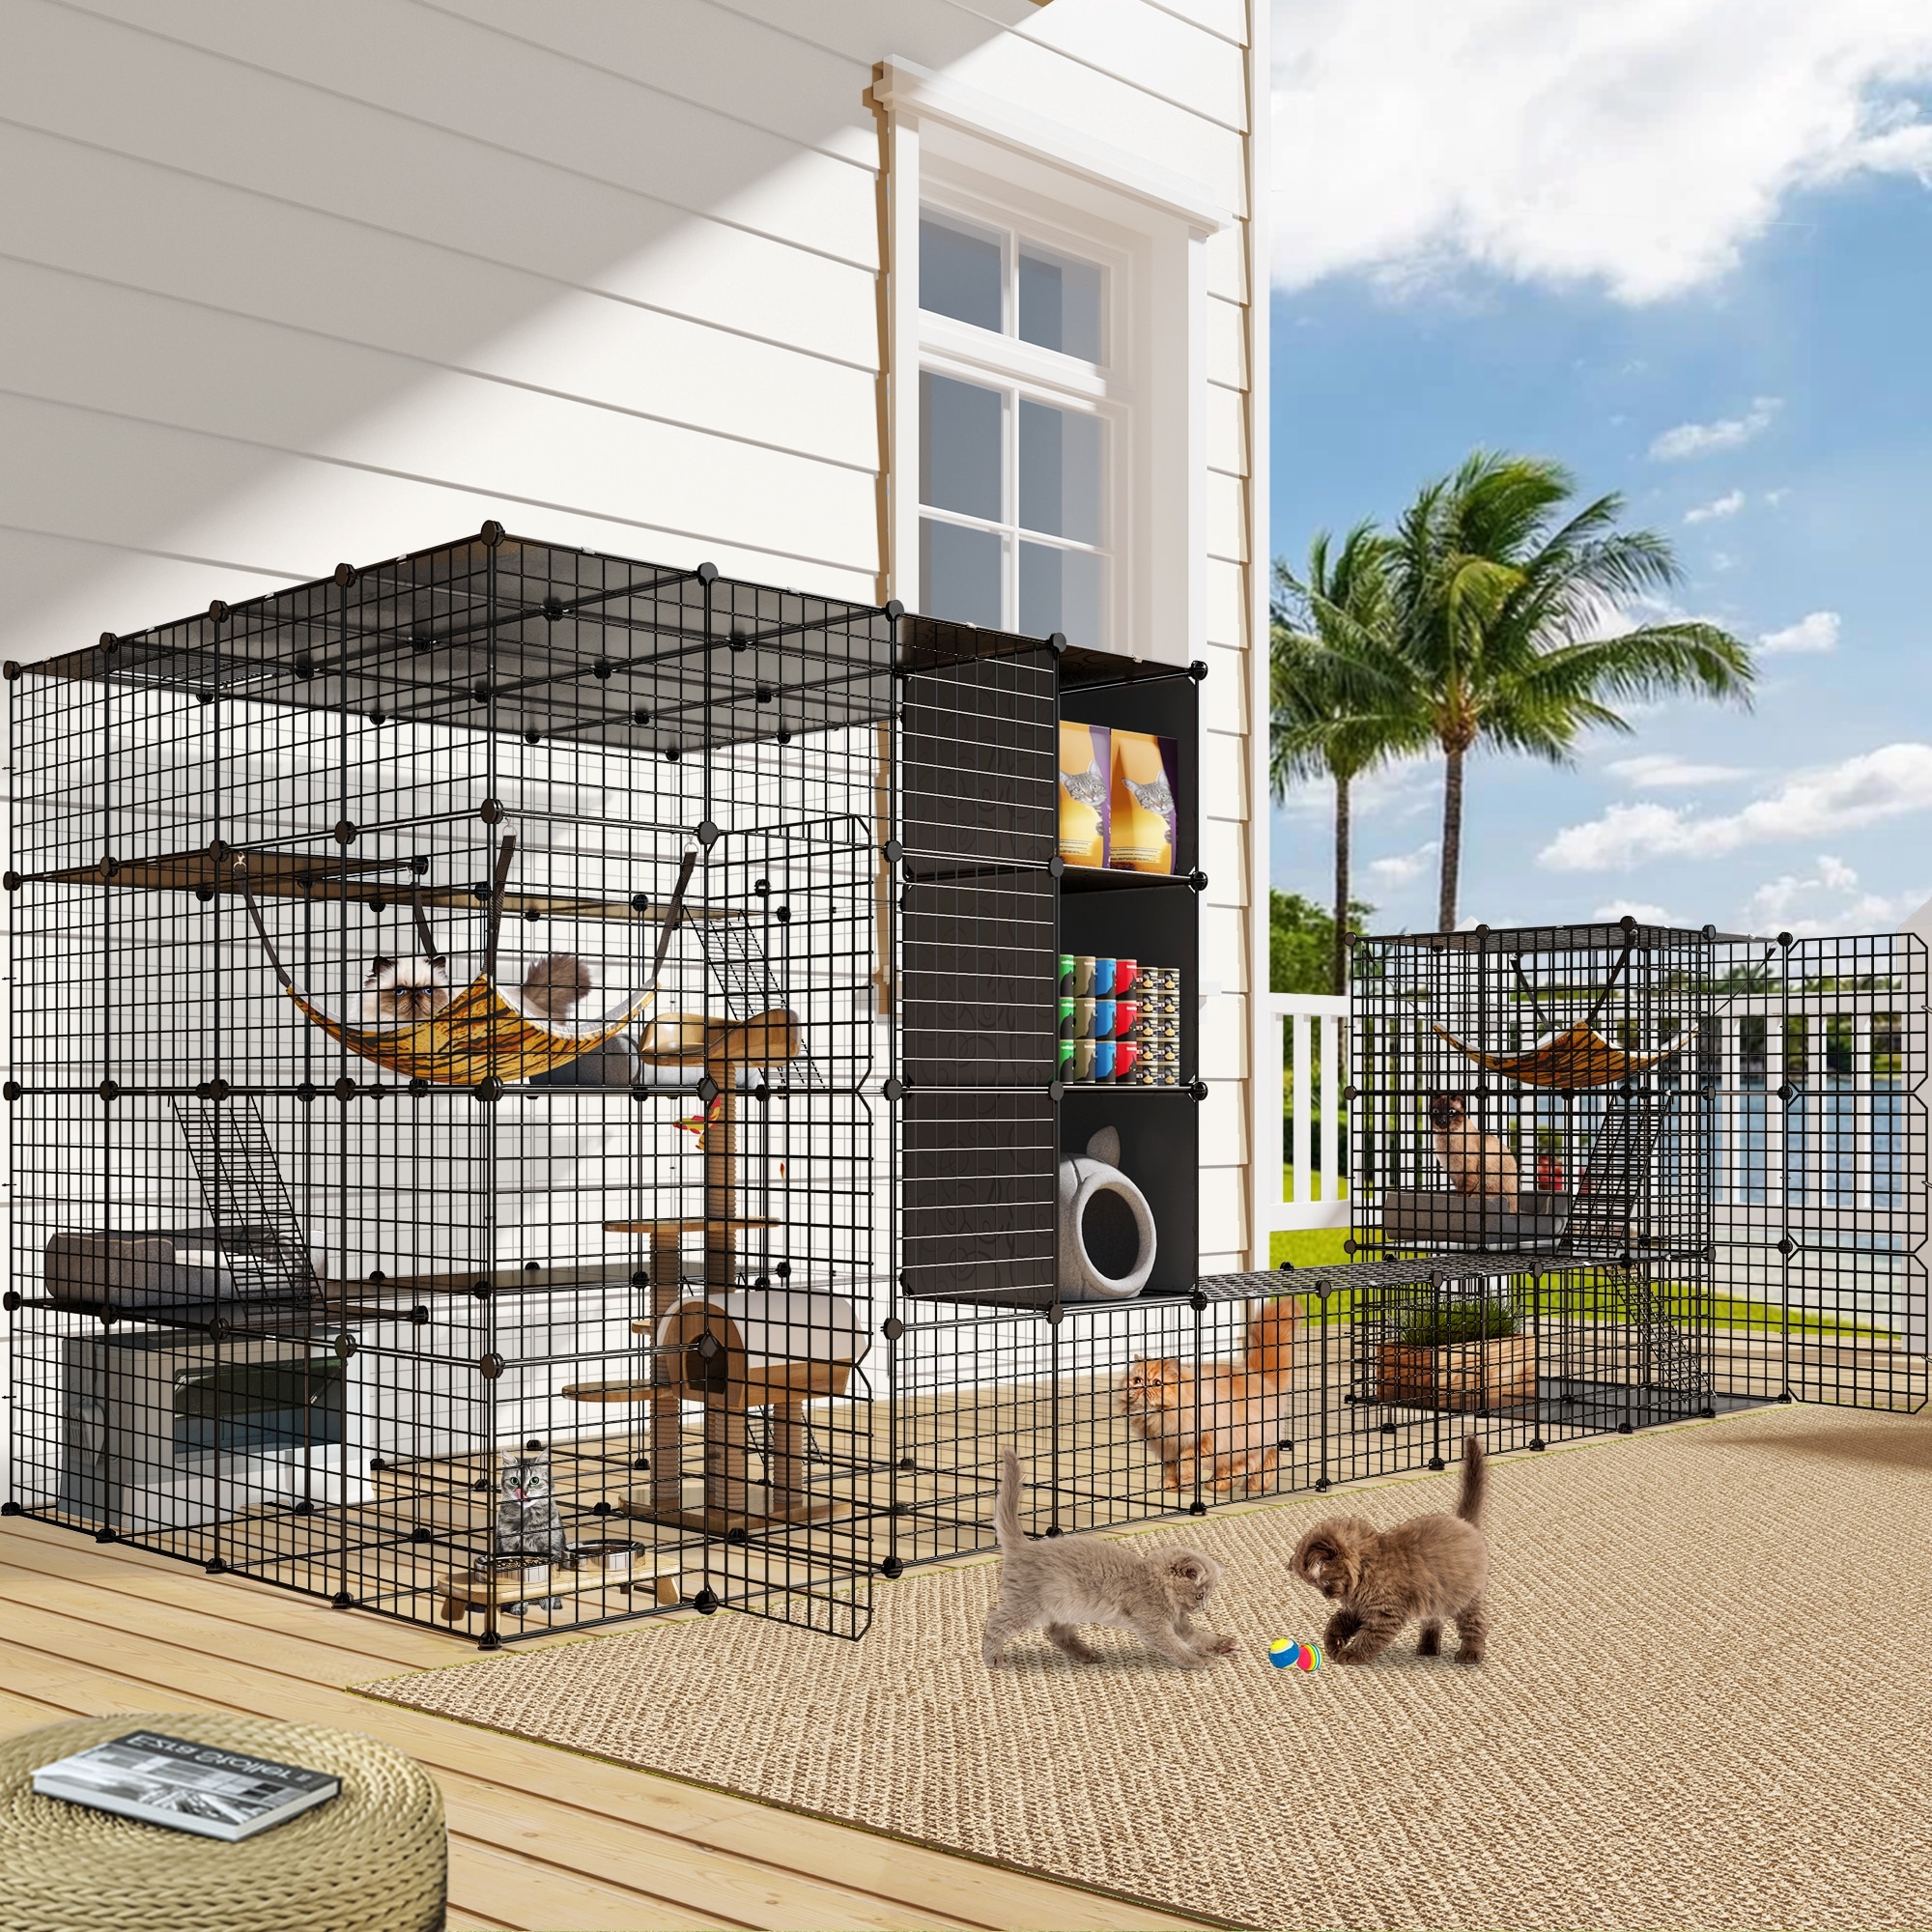 Catios & Outdoor Cat Enclosures, Up To 20% Off